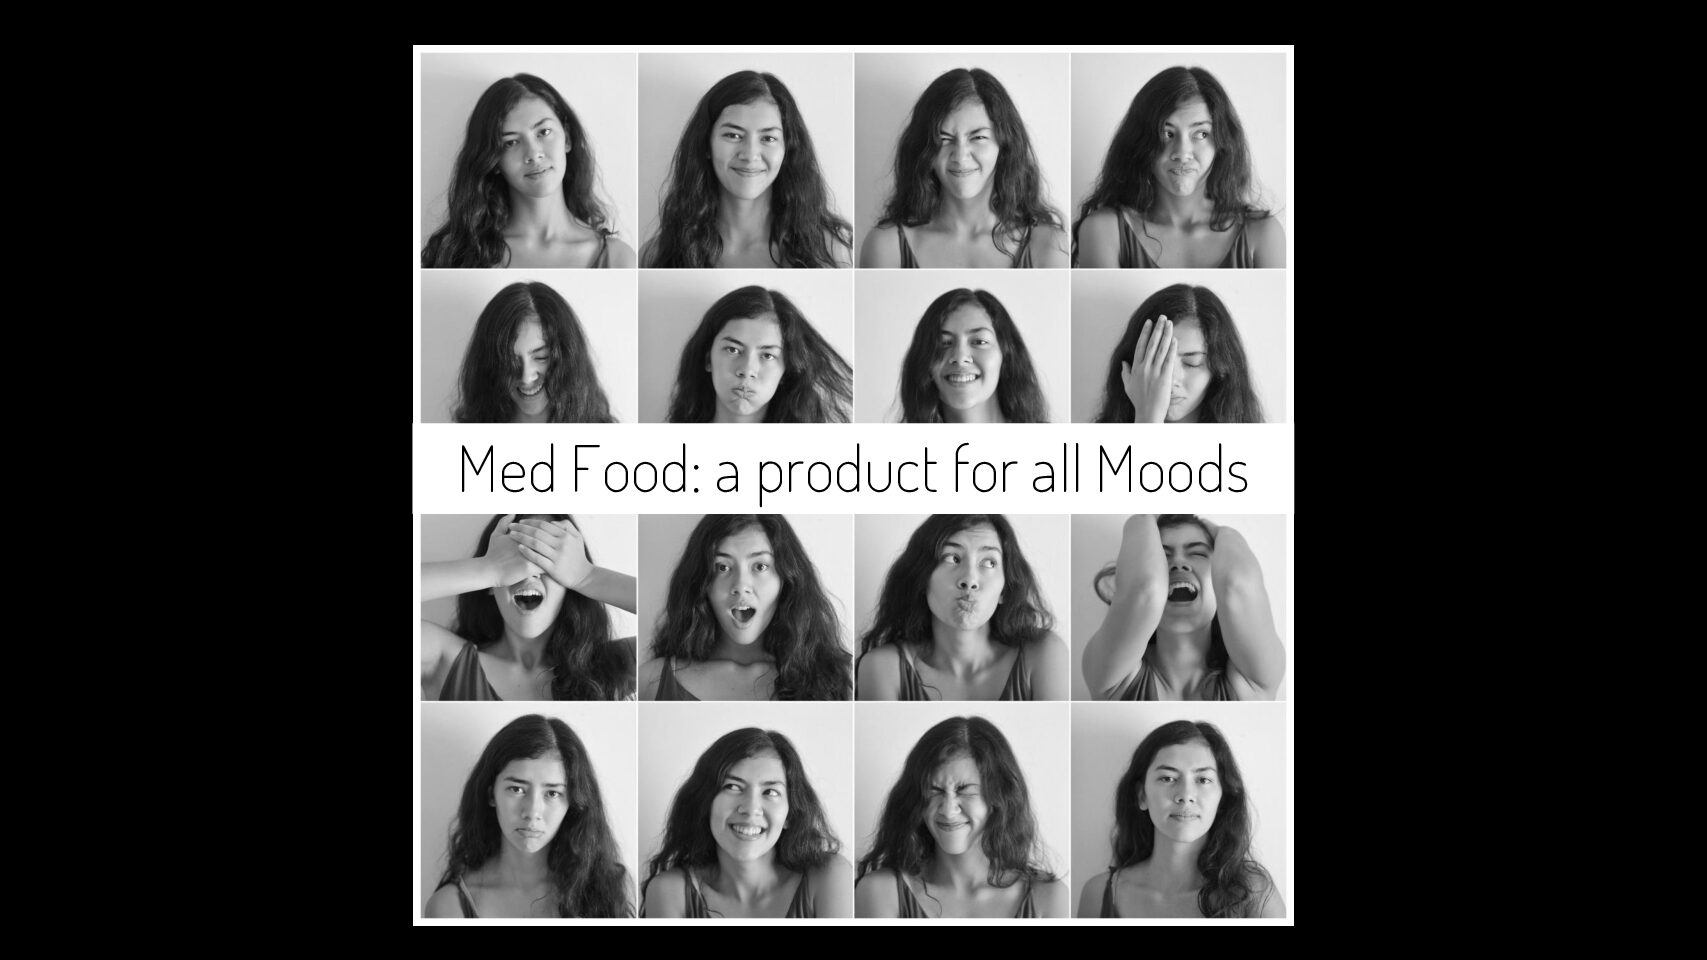 A SINGLE PRODUCT FOR ALL MOODS!